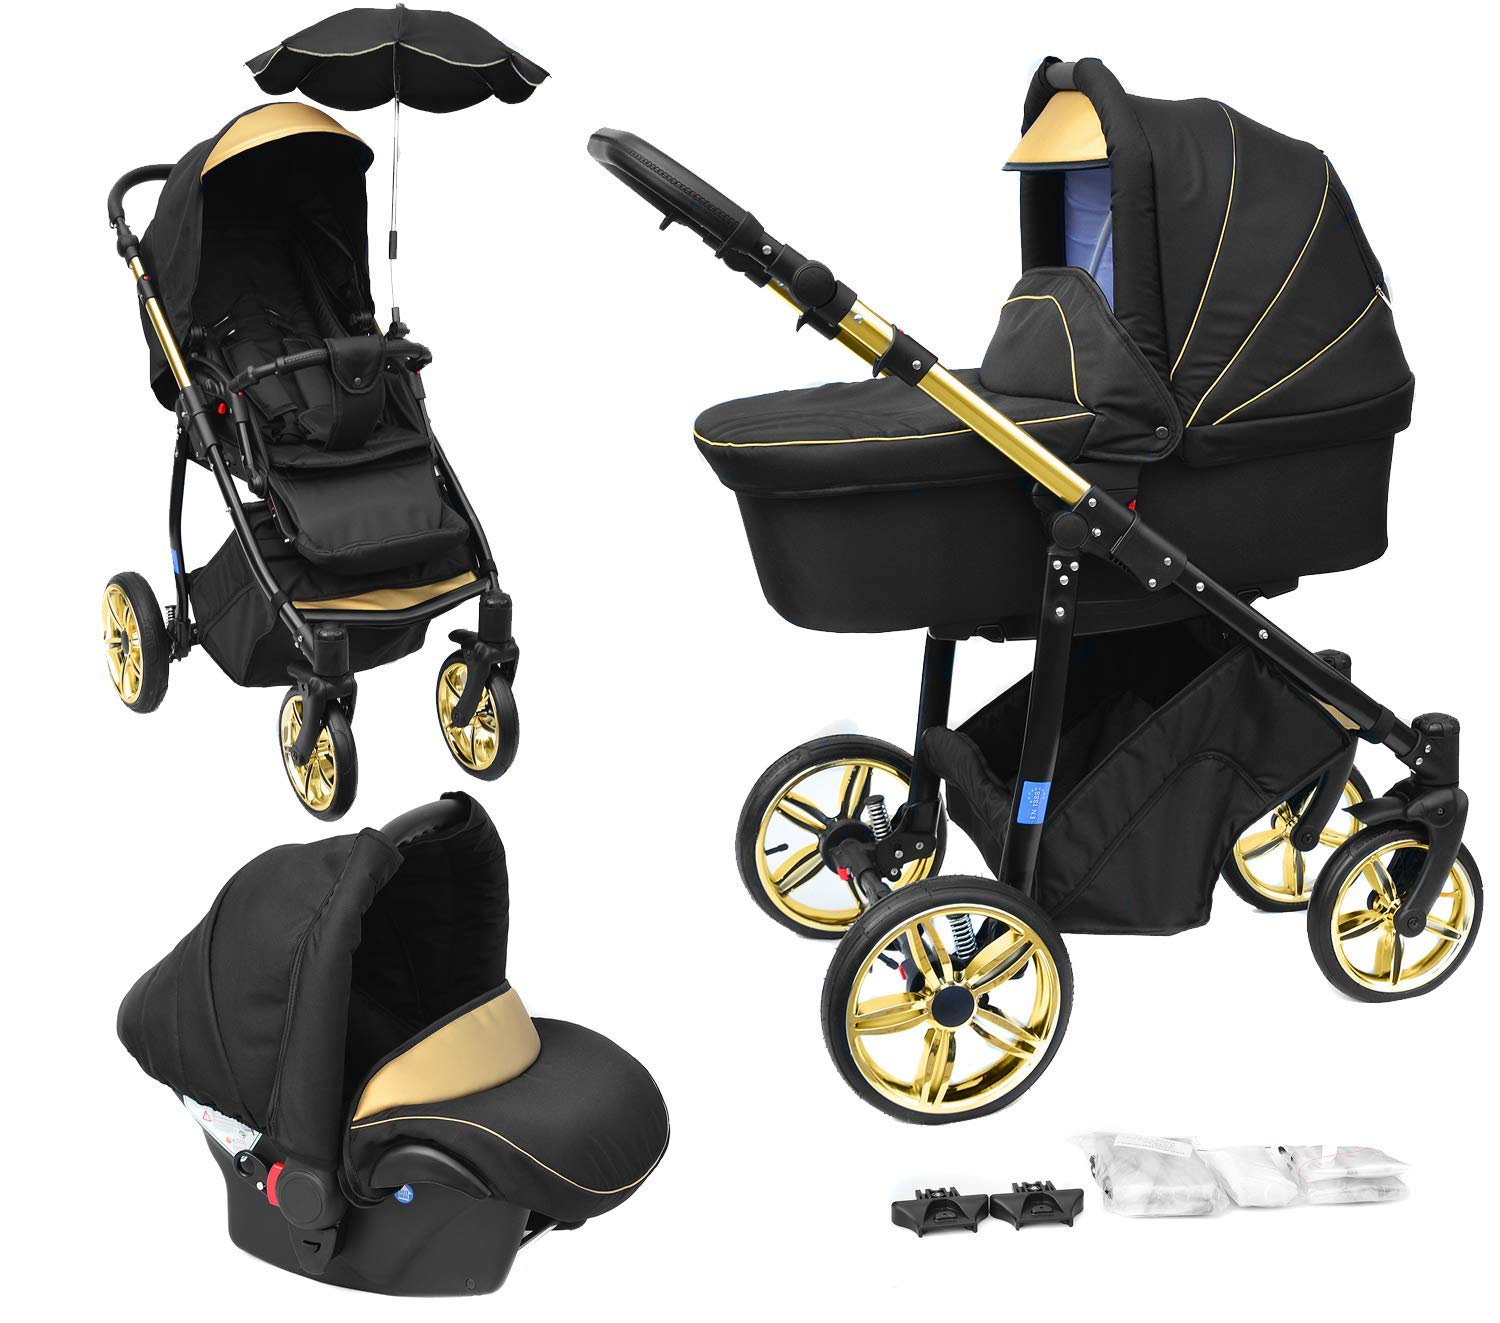 Skyline 3-in-1 Combination Pram with Aluminium Frame, Baby Cot, Sports Buggy Attachment and Baby Car Seat (ISOFIX)